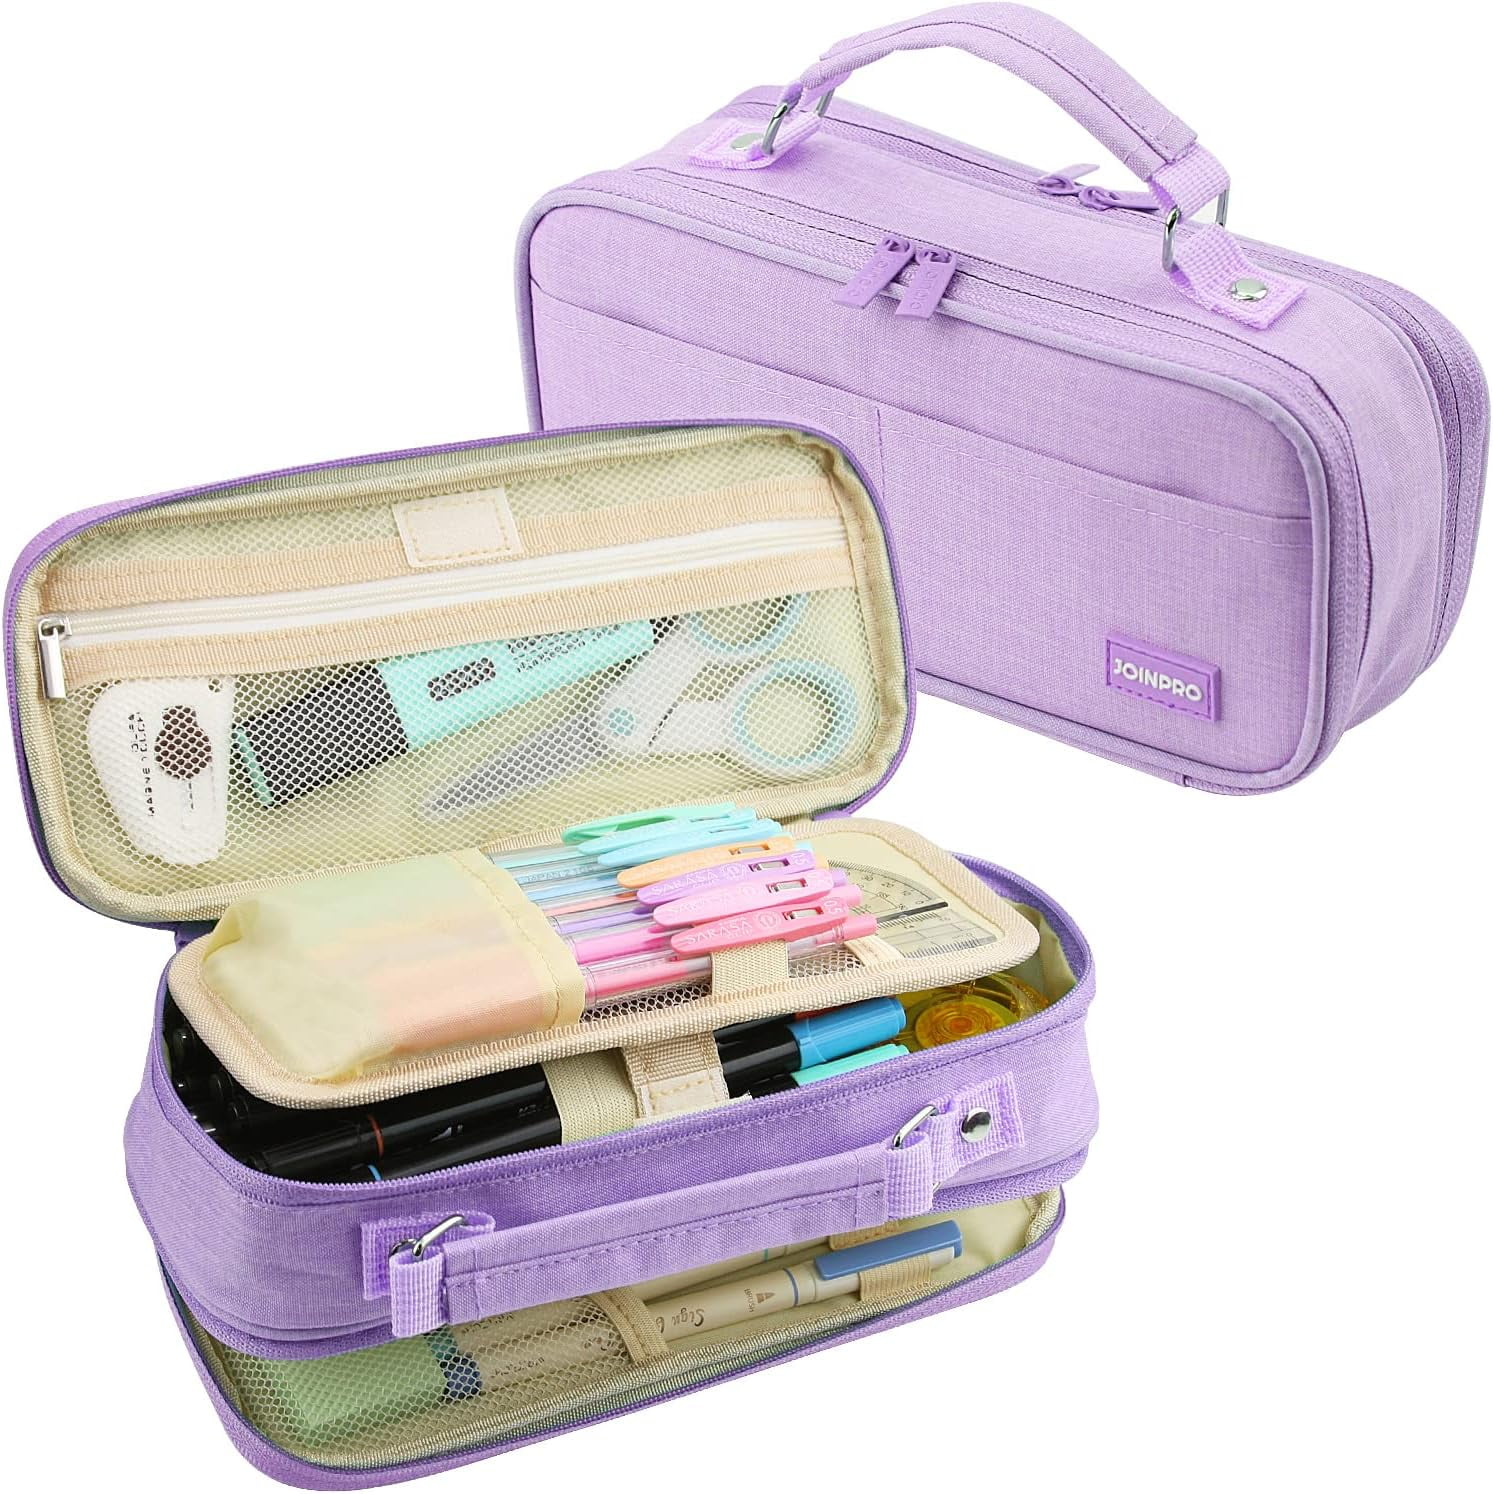 Cacagoo Pencil Case Large Capacity School Pencil Box Stationery Zipper Pocket for Office Home Storage Multilayer Storage Pocket Gift for Kids Children